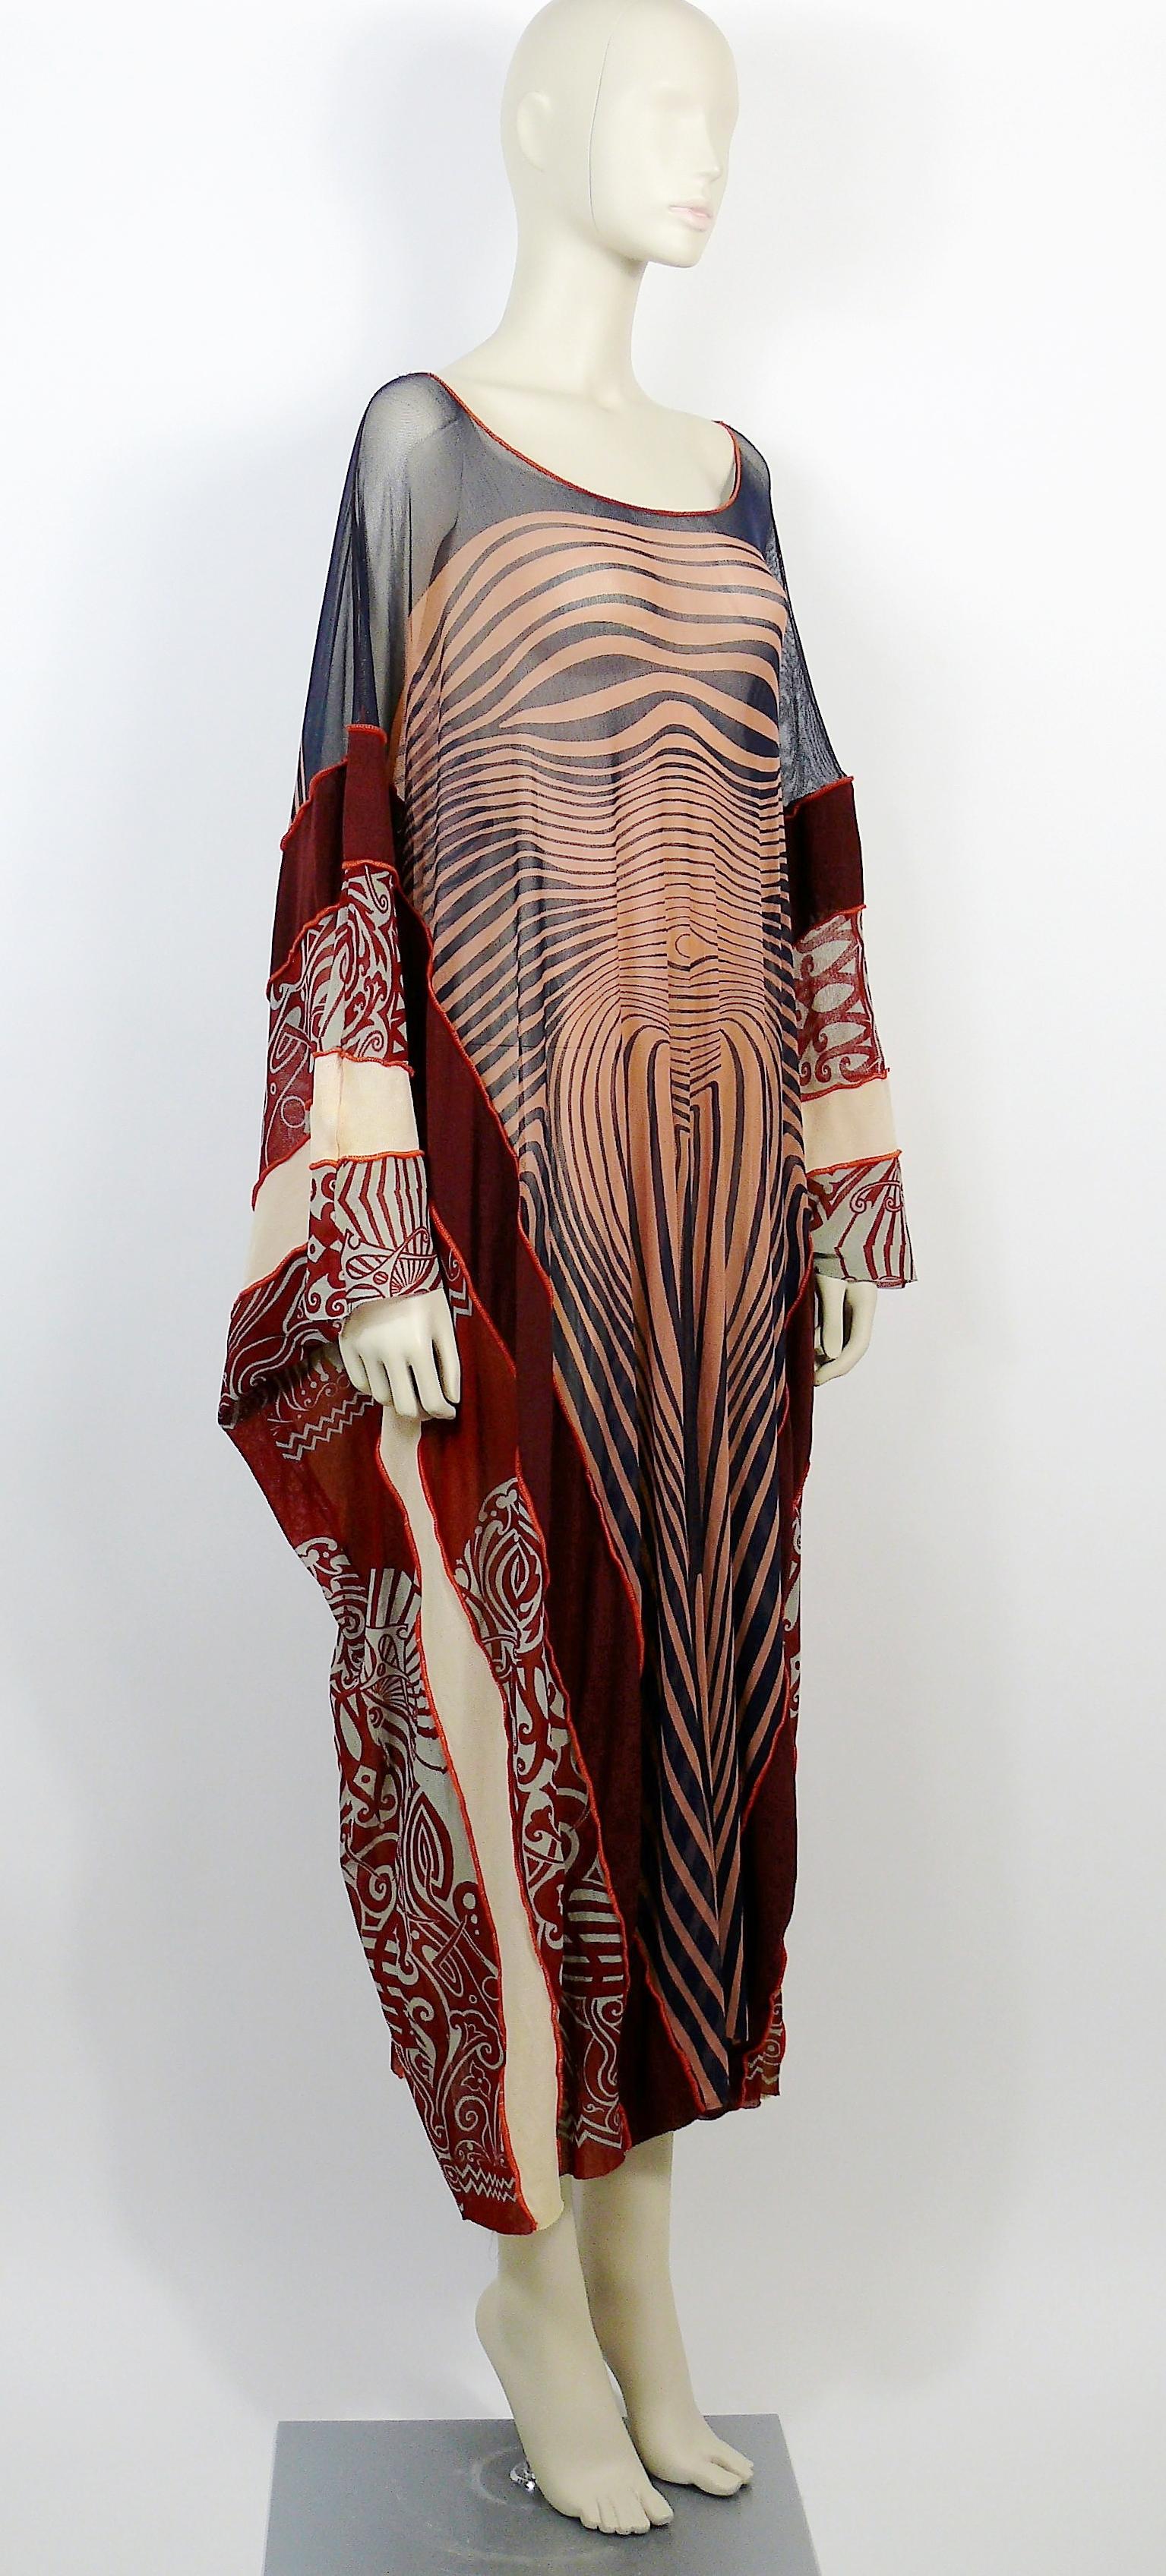 JEAN PAUL GAULTIER vintage rare sheer mesh maxi caftan dress featuring the iconic JEAN PAUL GAULTIER's body contour illusion print and tribal tattoo design details.

As seen at the JEAN PAUL GAULTIER Spring/Summer 1996 runway show.

Label reads JEAN